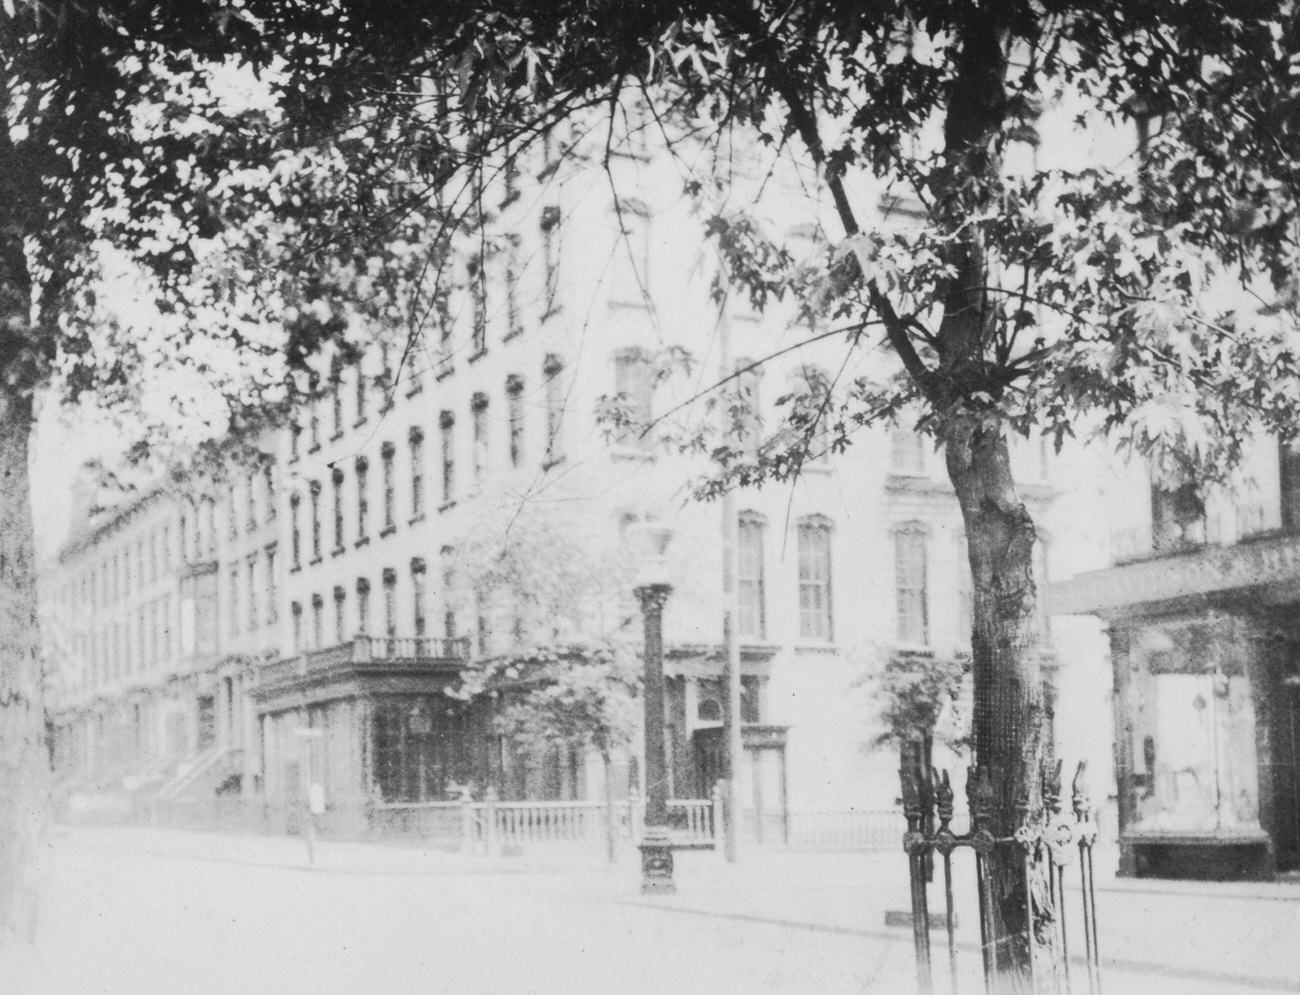 Pierrepont House Hotel At Montague And Hicks Street, Brooklyn, Late 1880S